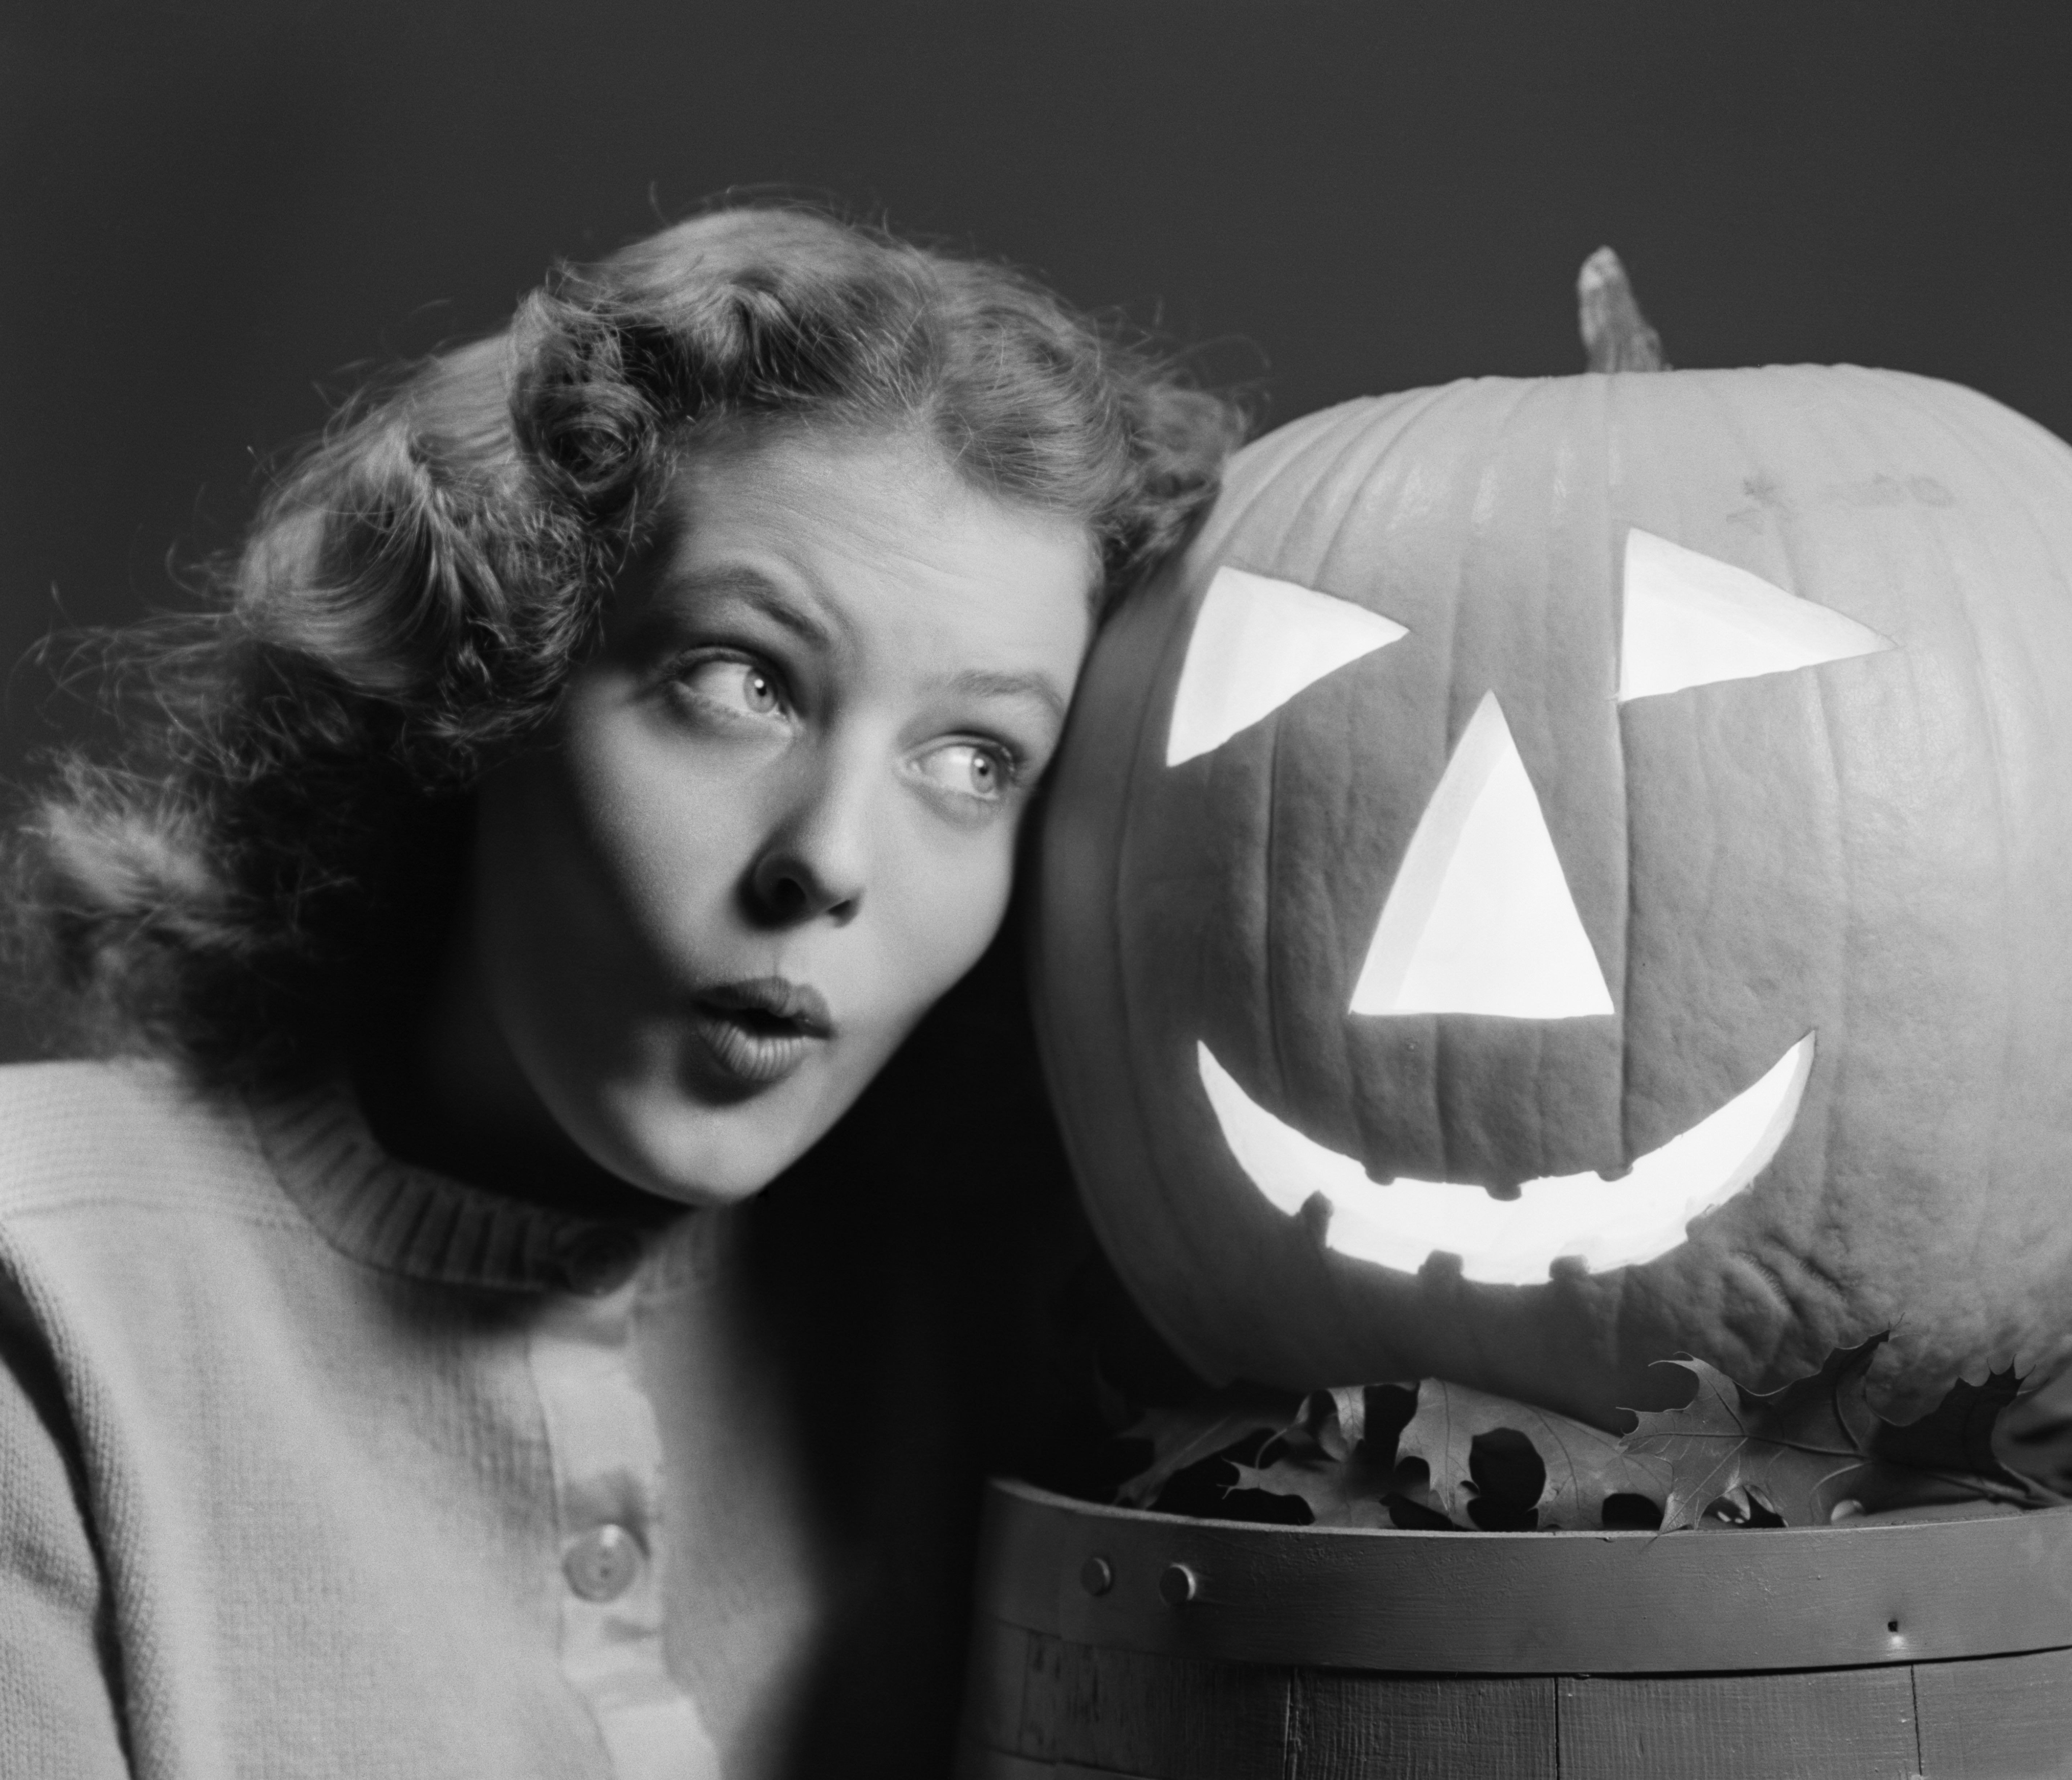 What is the History of Halloween?